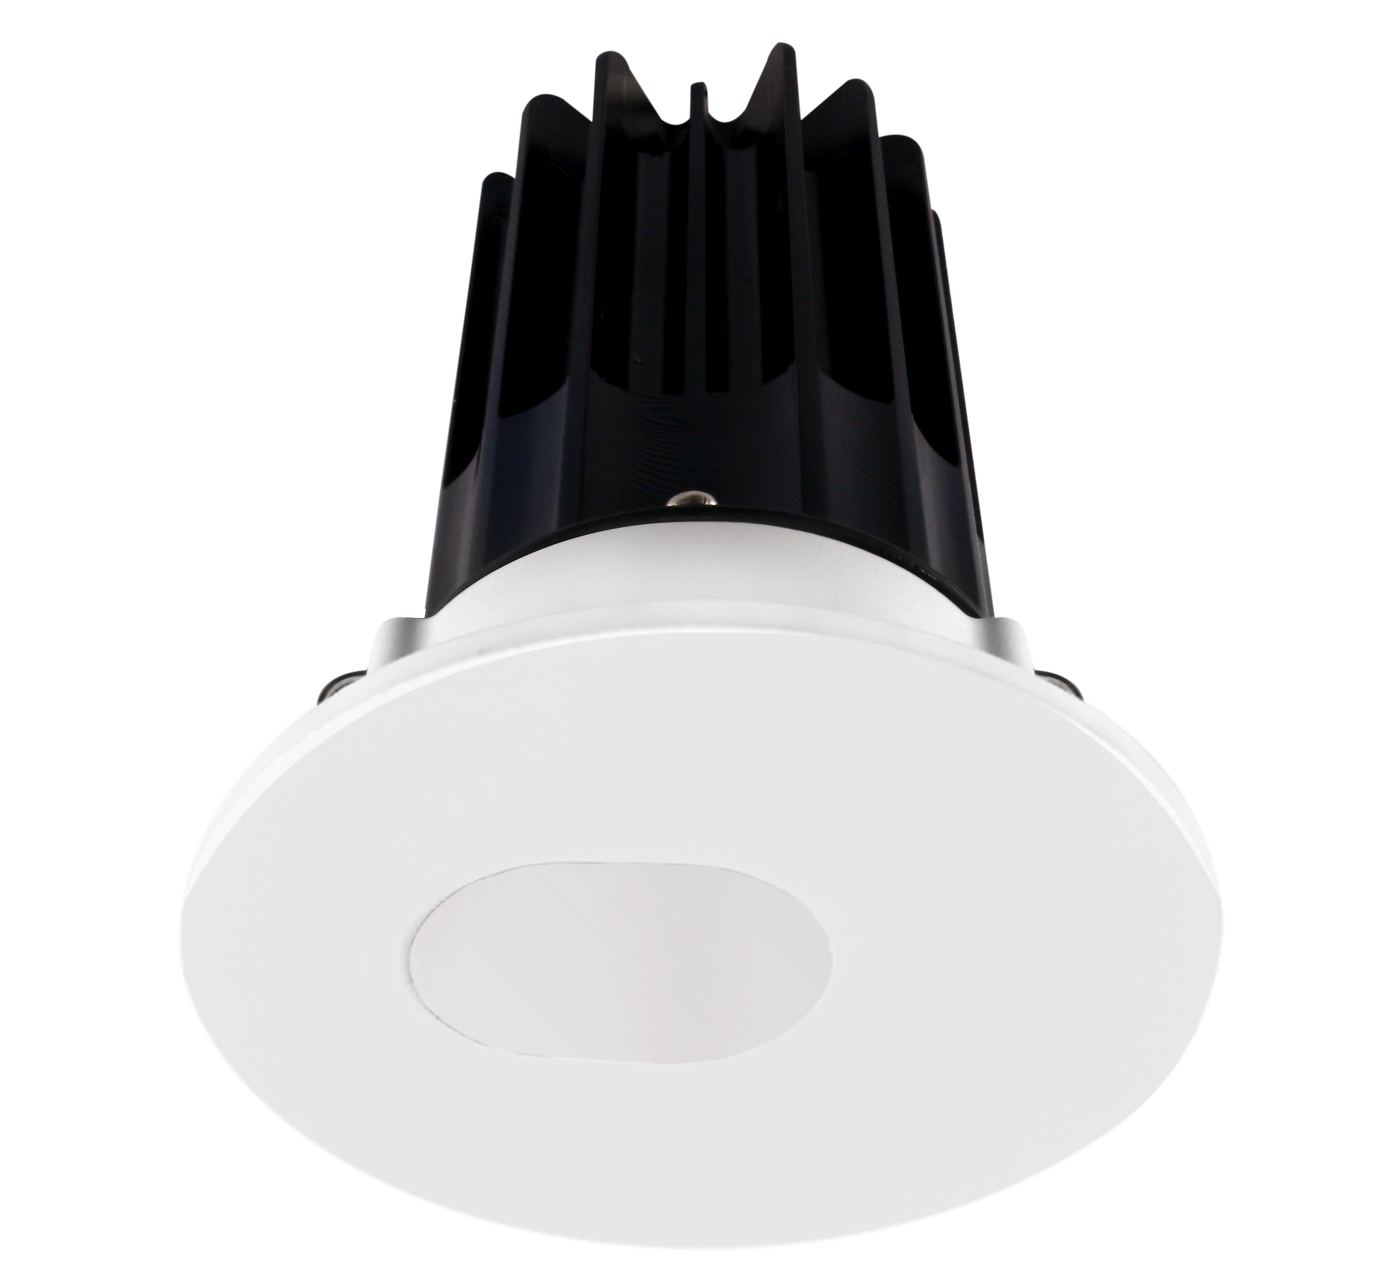 2" Recessed LED, 8W, 2700K, Multiple Reflectors and Round Trims